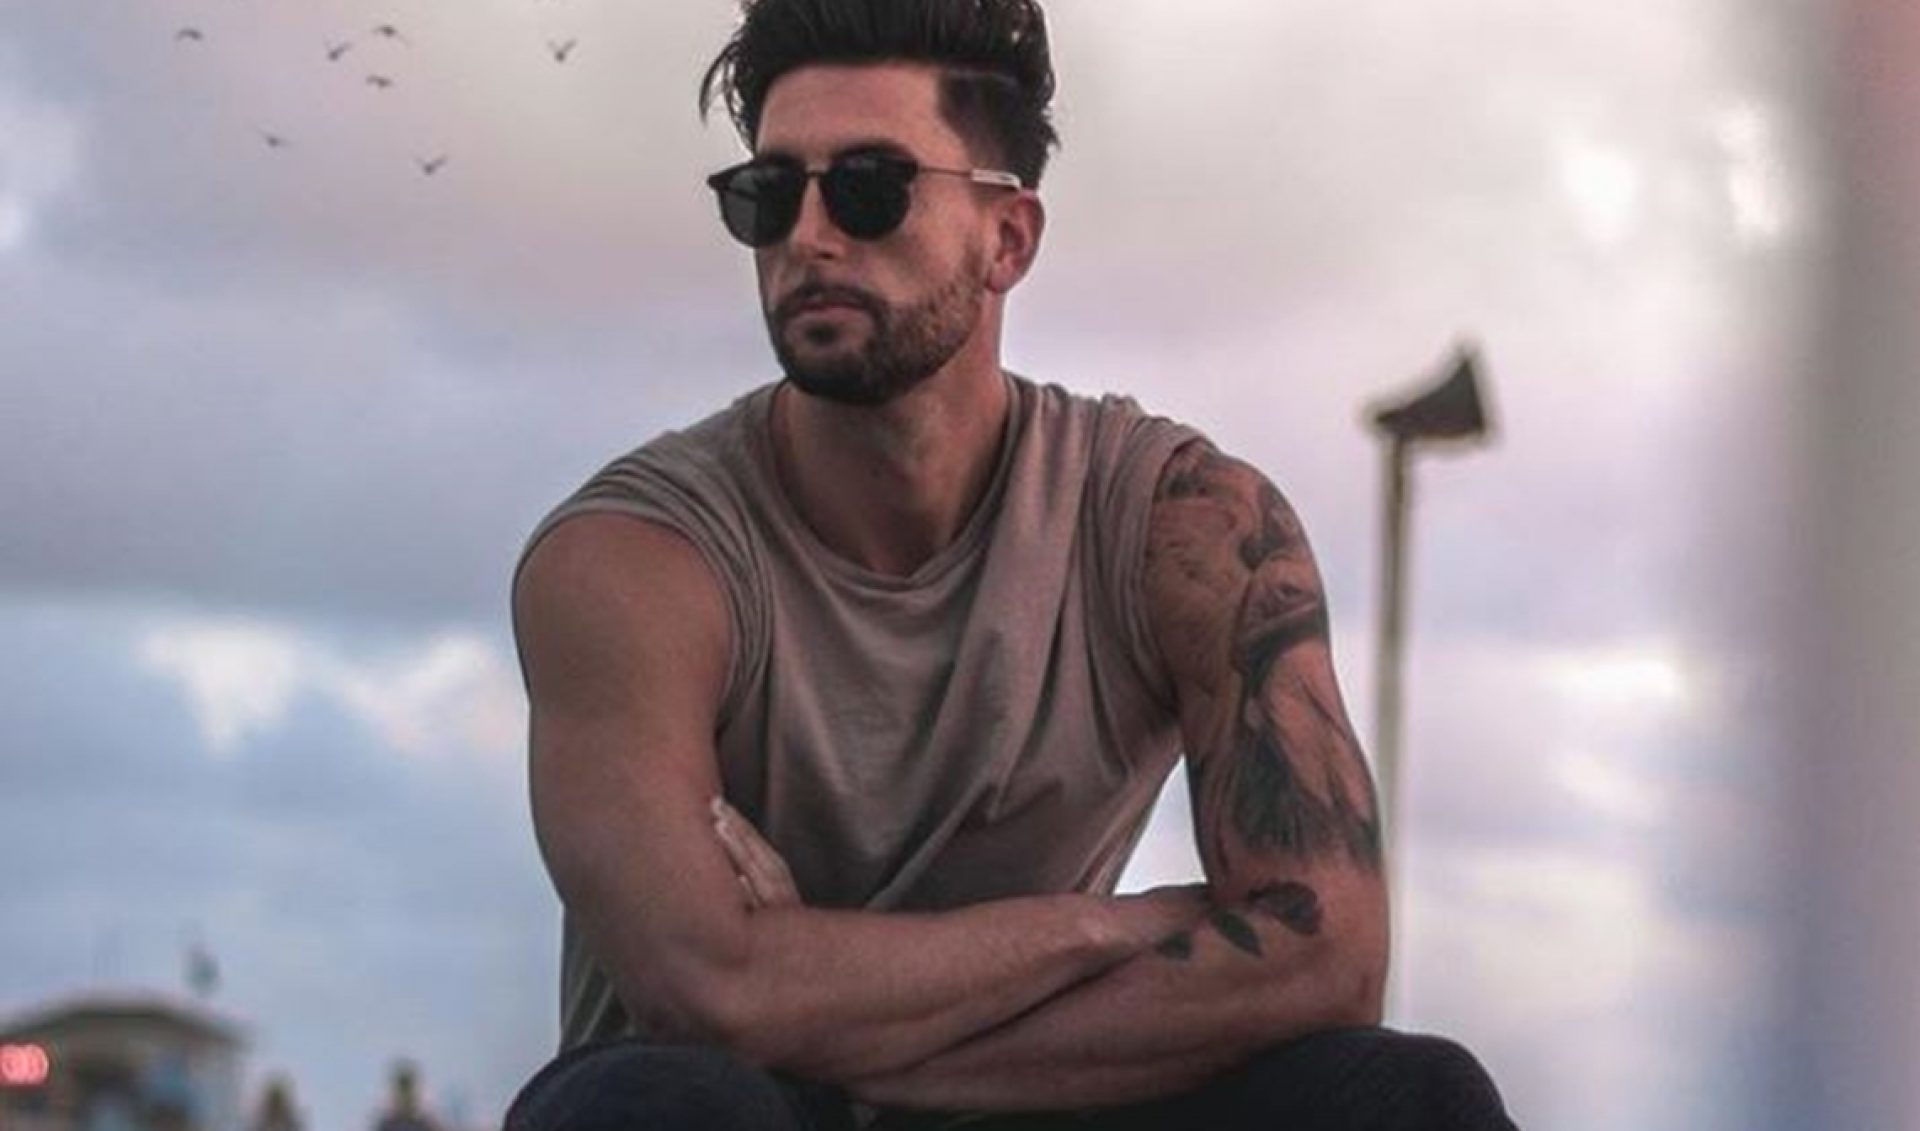 Jesse Wellens Returns With Hoverboard Stunt In Annual Halloween Video